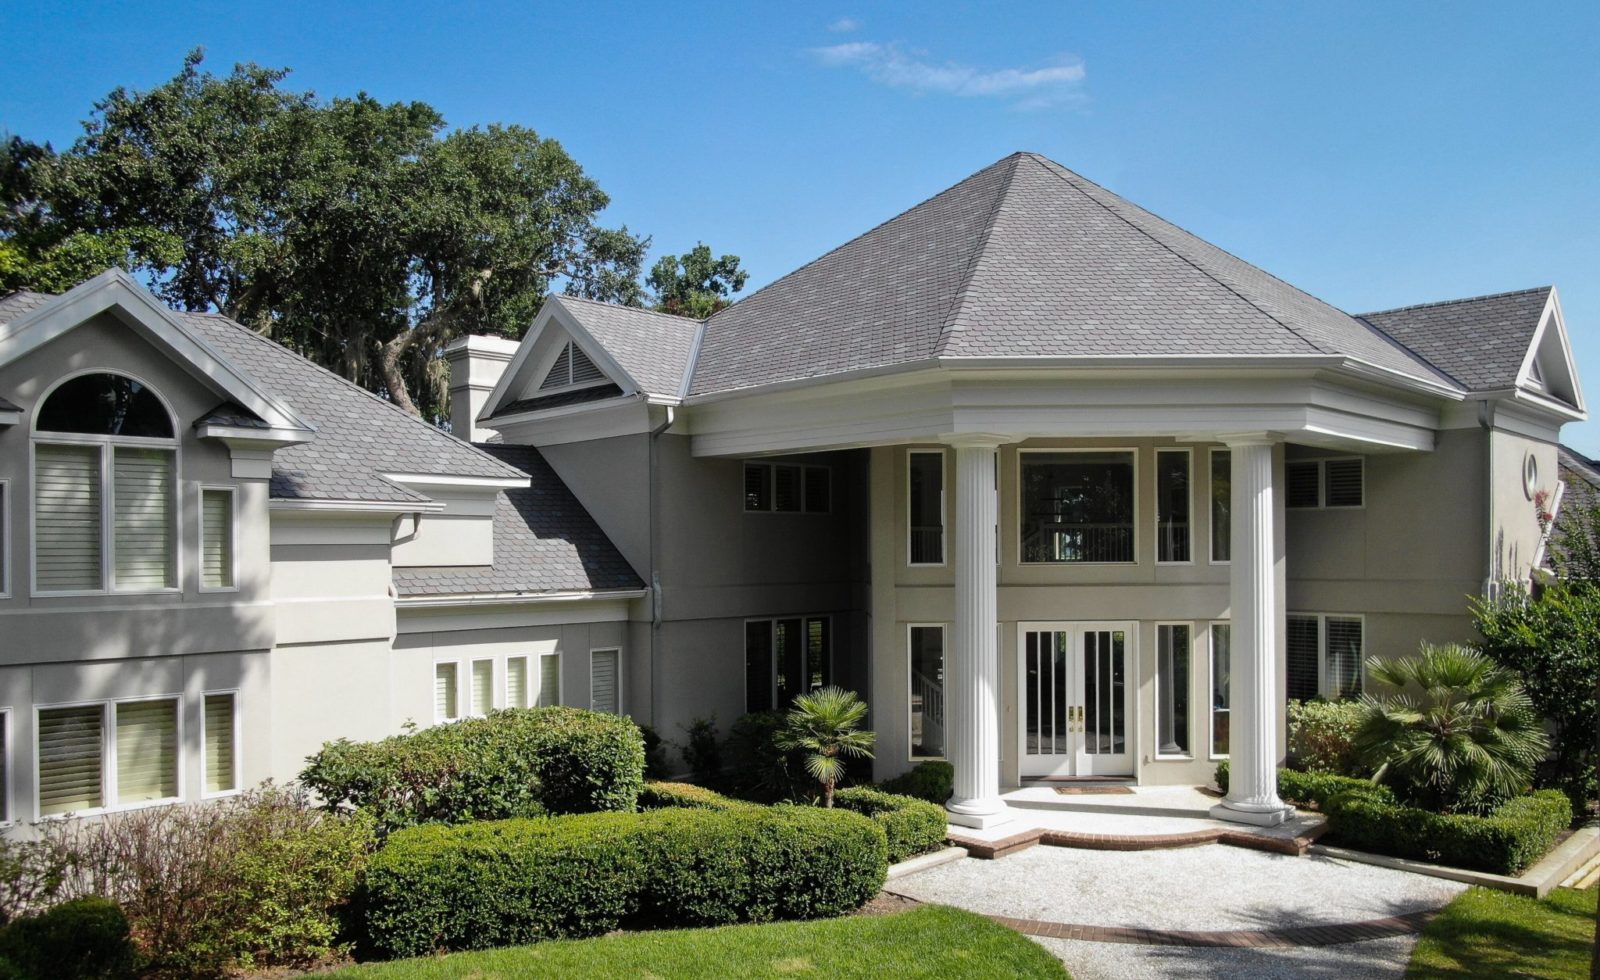 South Carolina F Wave Synthetic Shingles Install in Colonial Estate